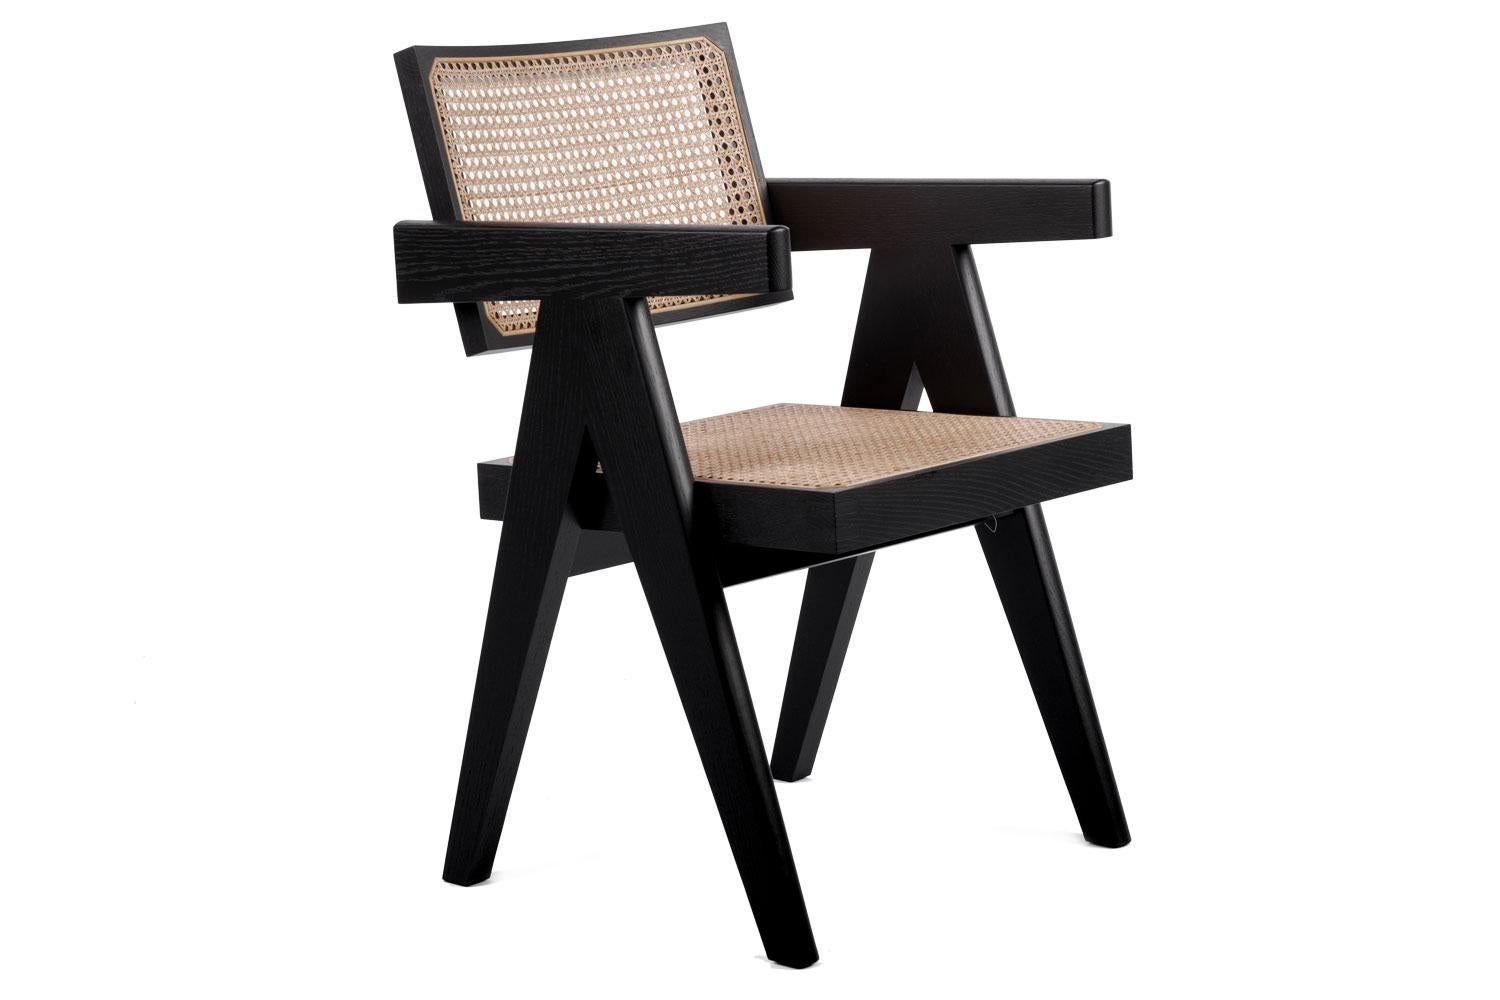 Modern Black Oak Stained Frame Chair with Woven Cane Seat + Back with Cushion, Cassina